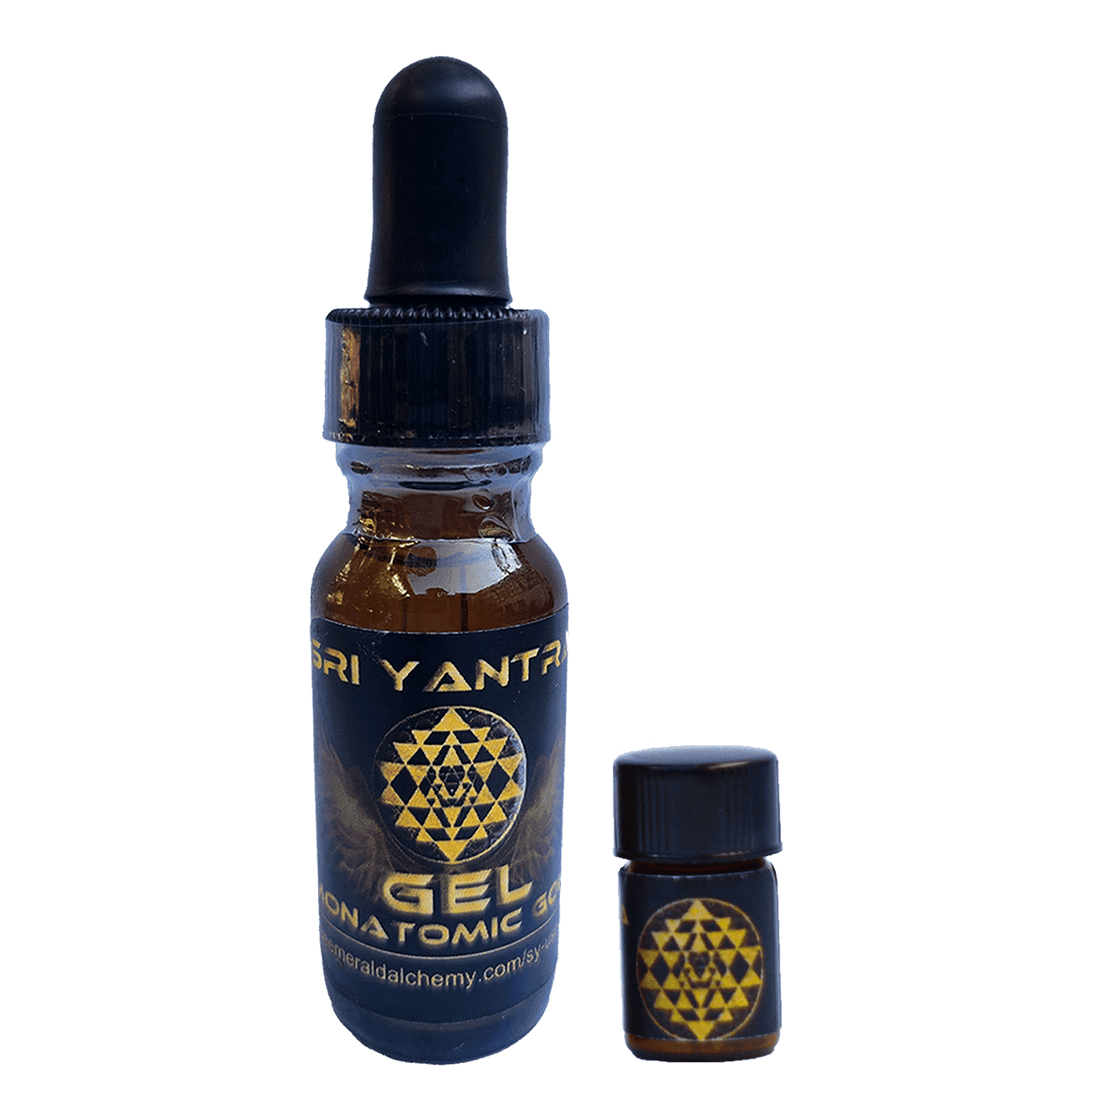 How to Use Sri Yantra Gel and White Powder Gold